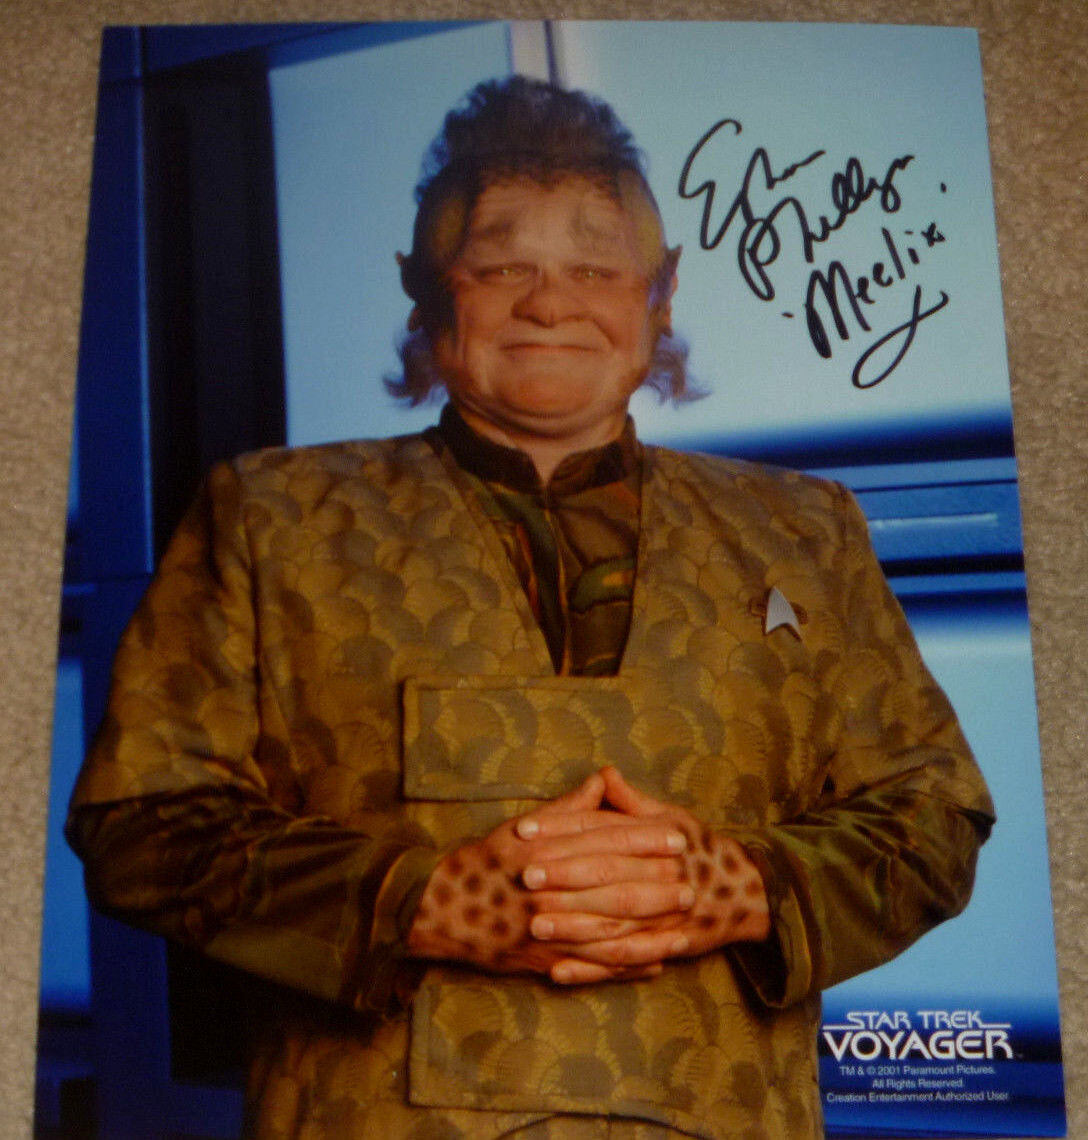 Ethan Phillips Authentic Signed 8x10 Photo Poster painting Autographed Star Trek Voyager, Meelix